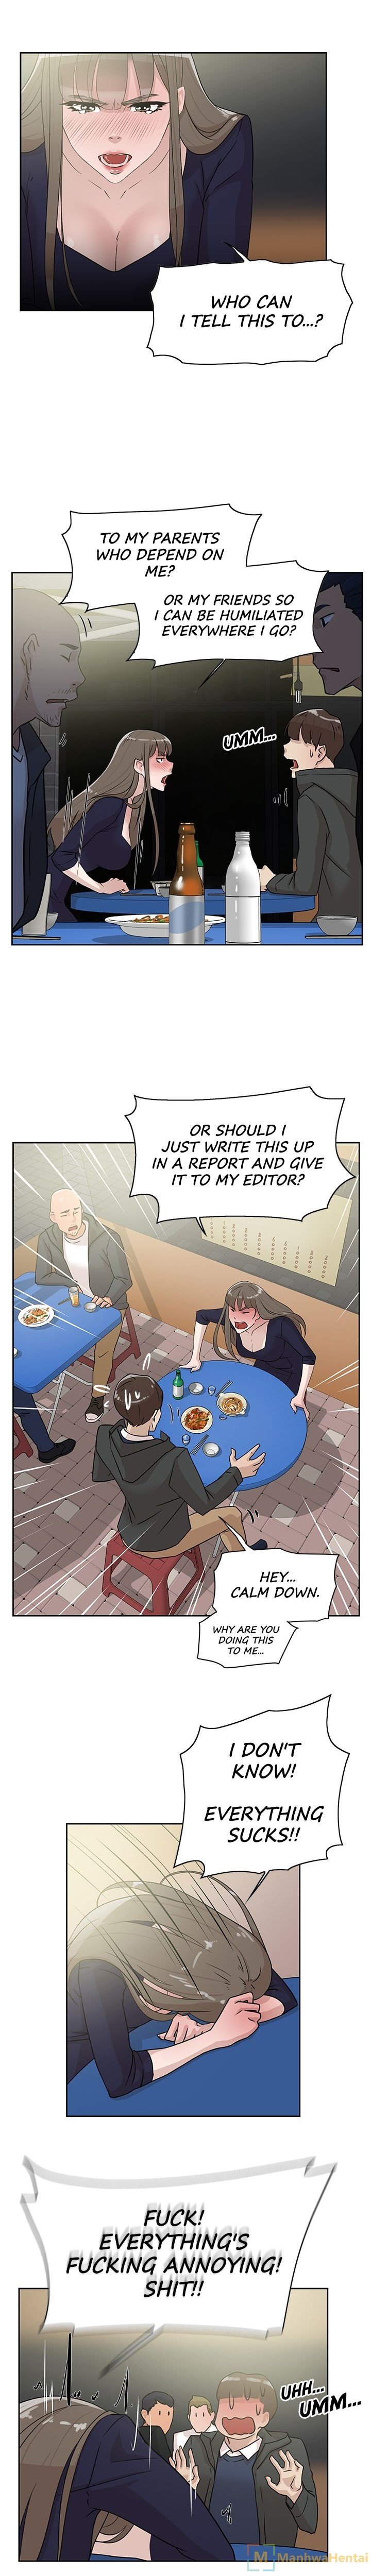 office-affairs-chap-31-5